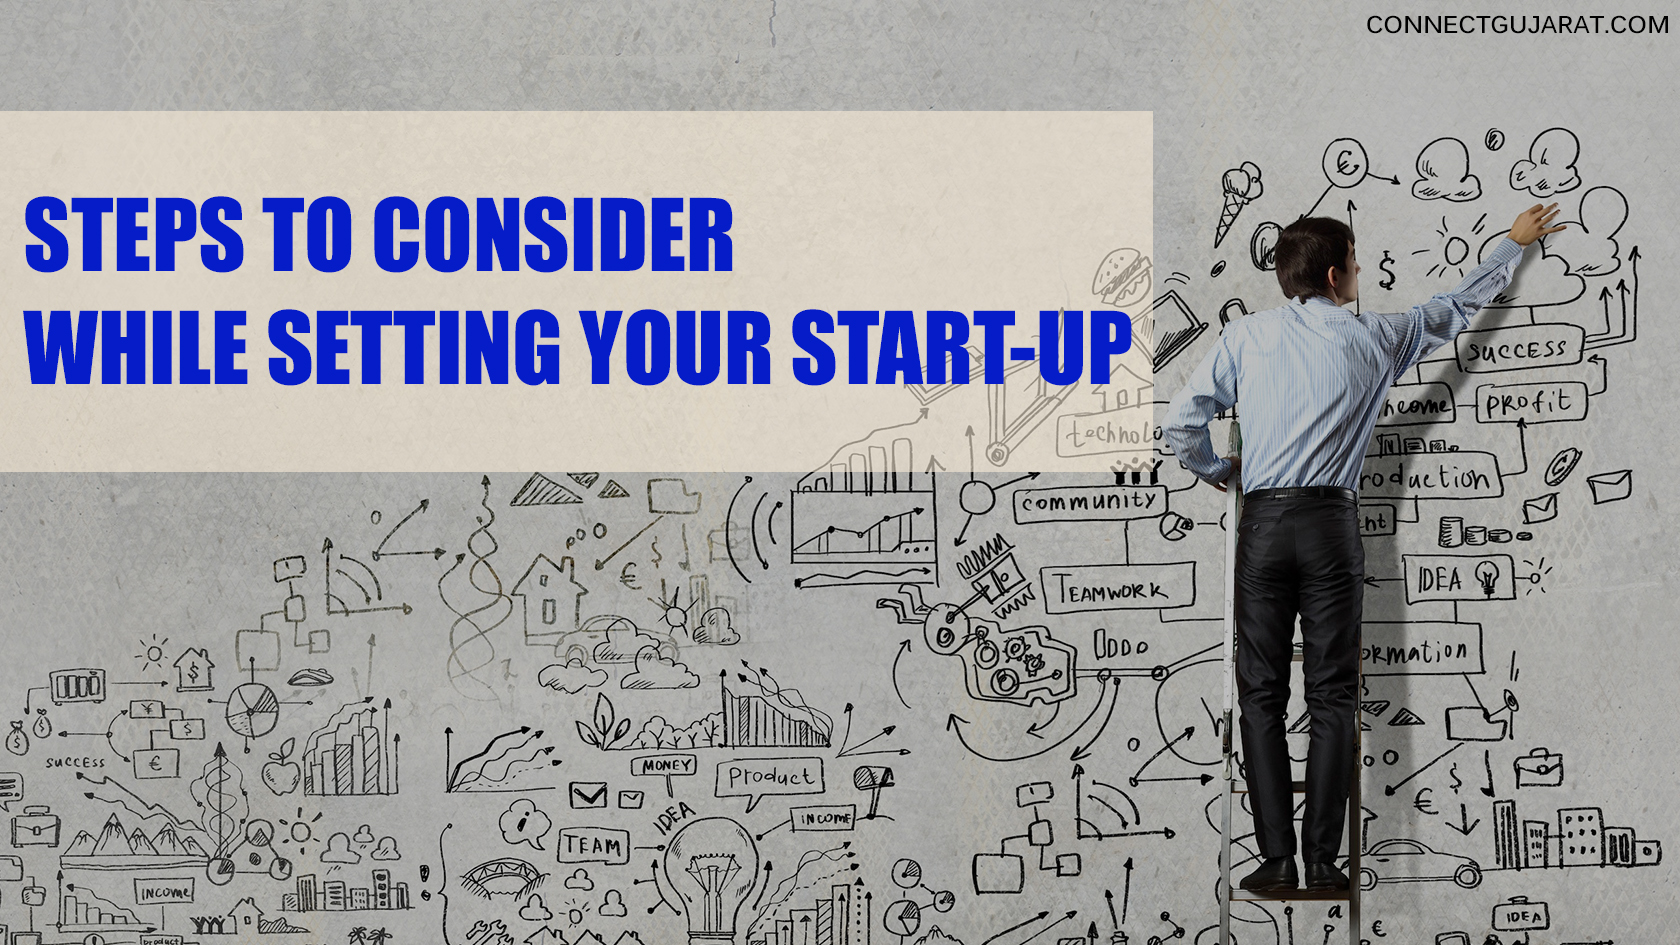 Steps to consider while setting your start-up